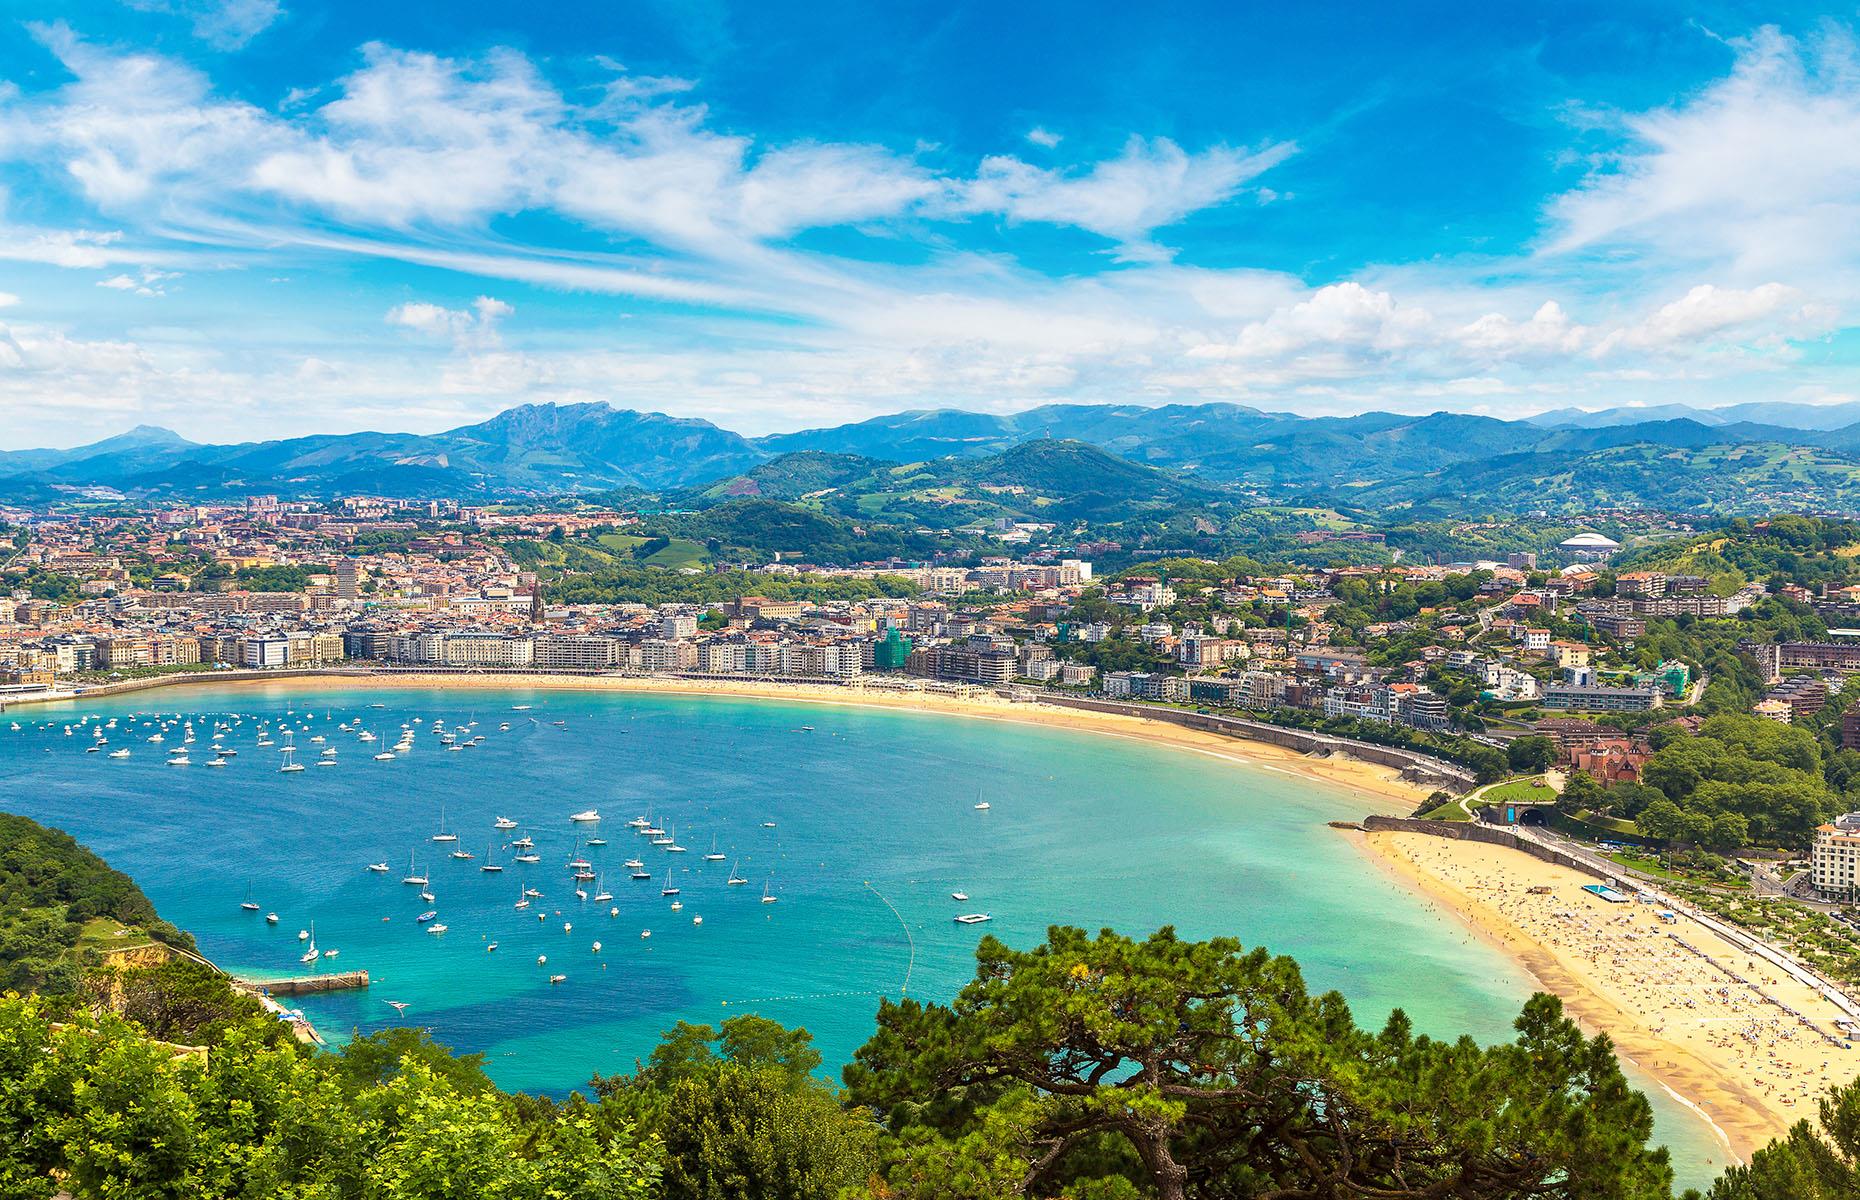 The celebrated 298-mile Basque Circuit winds its way through the rugged landscapes of northern Spain and southwest France. from Bilbao to Pamplona and up into the Pyrenees, before plunging back down towards Biarritz and tracing the Bay of Biscay, taking in the many splendors of San Sebastián (pictured) along the way.